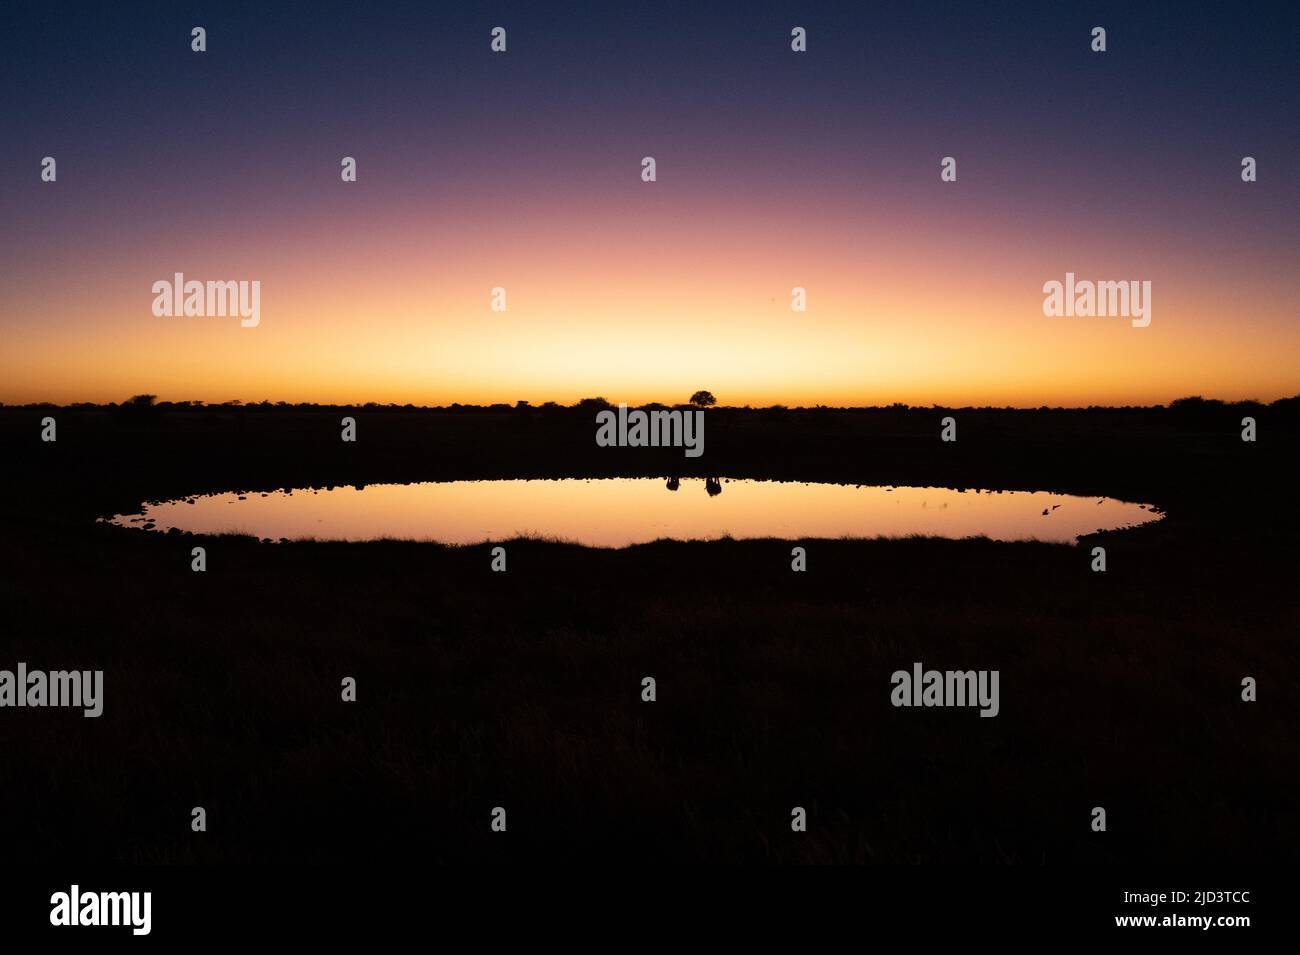 Reflection of black rhinos in the Okaukuejo waterhole at sunset in the Etosha National Park in Namibia Africa Stock Photo